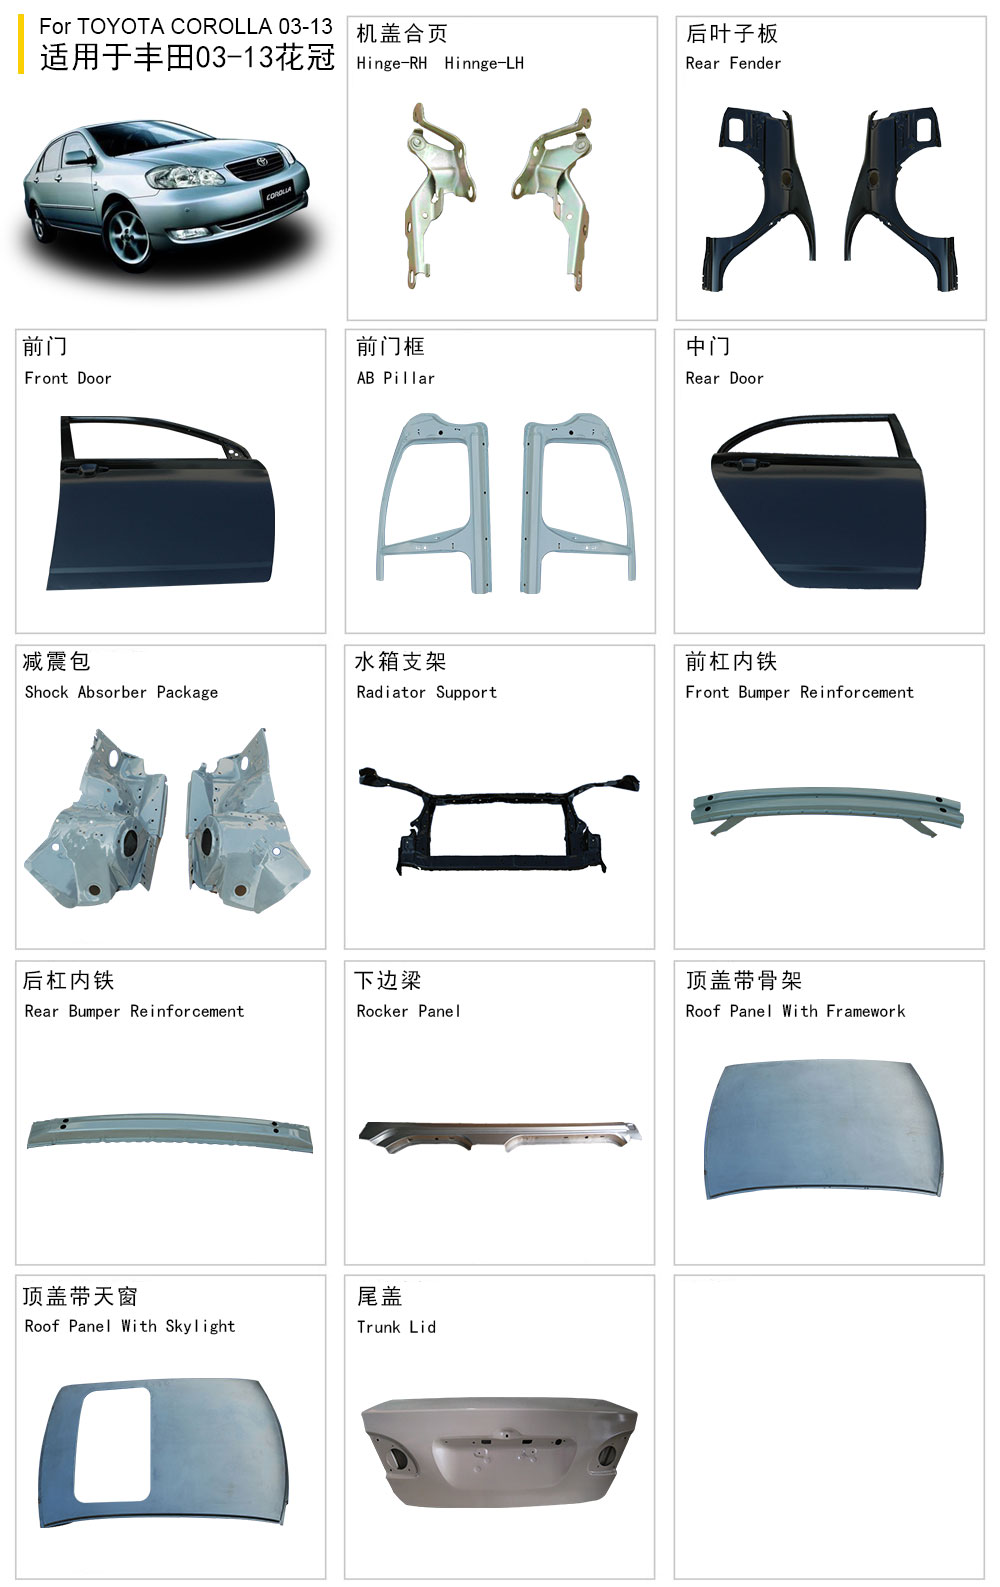 Toyota Corolla 2003-2013 Roof Panel With Framework